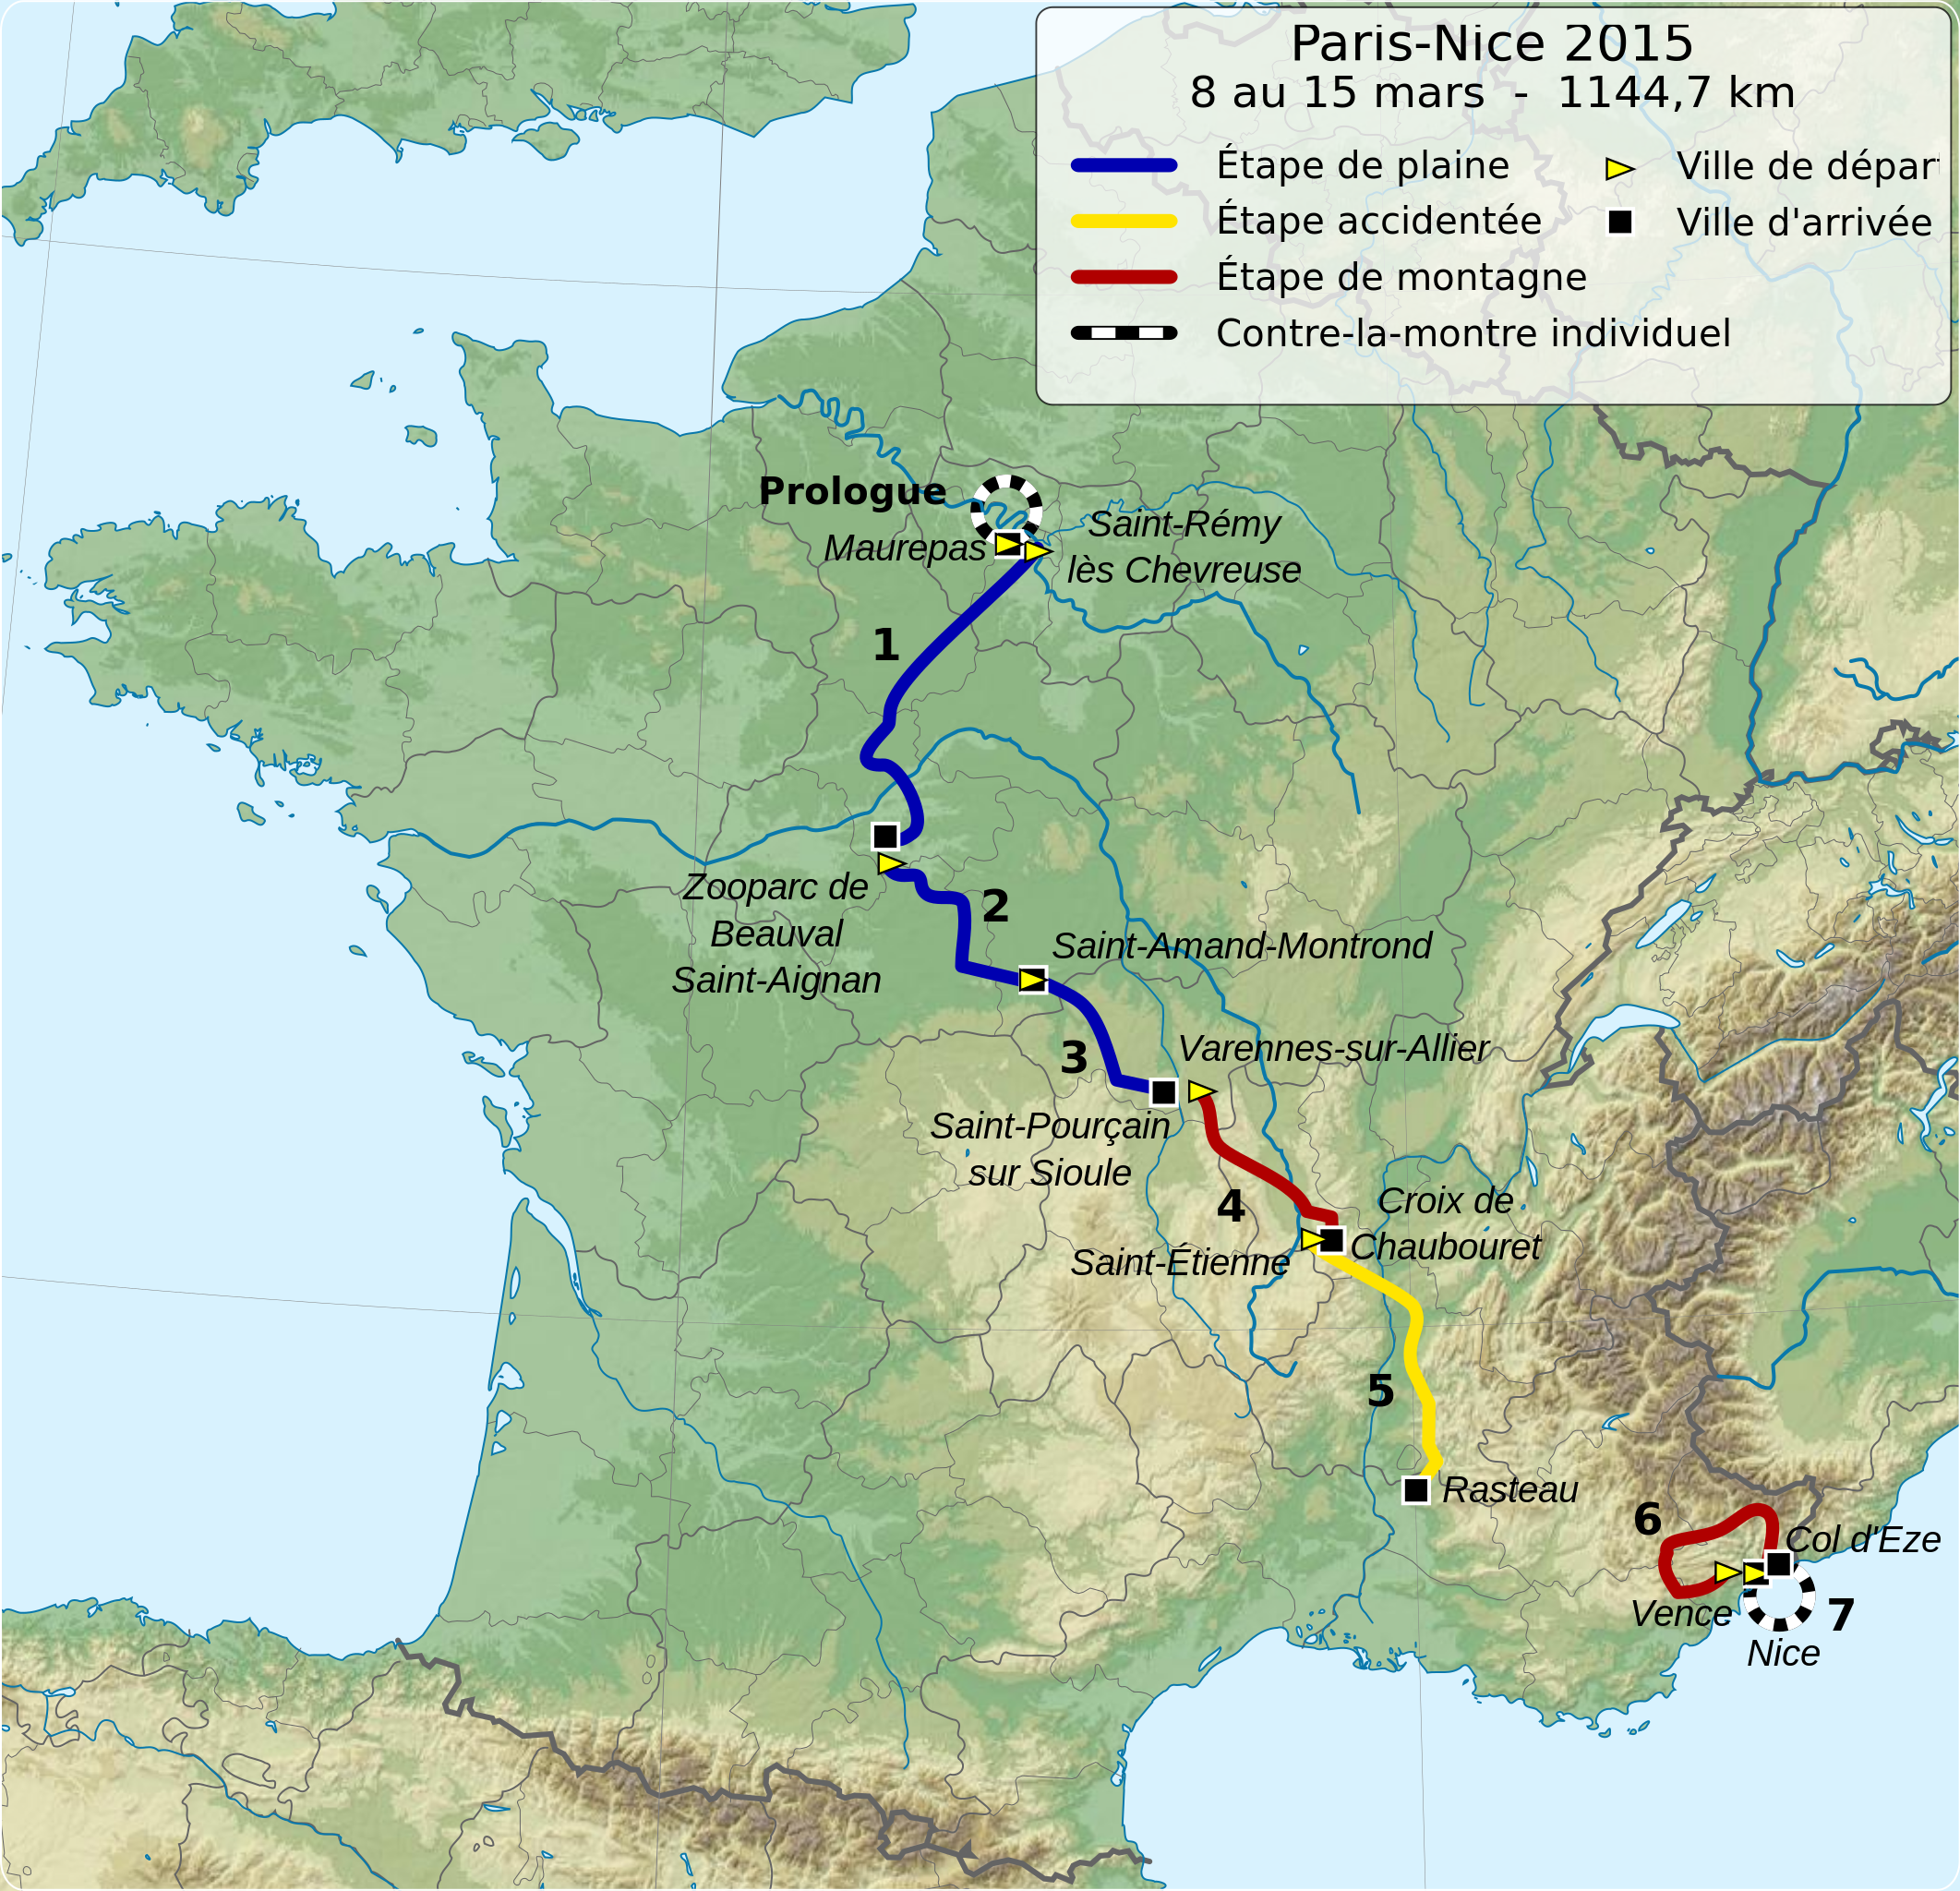 File:Paris-Nice 2015 overview.svg - Wikimedia Commons